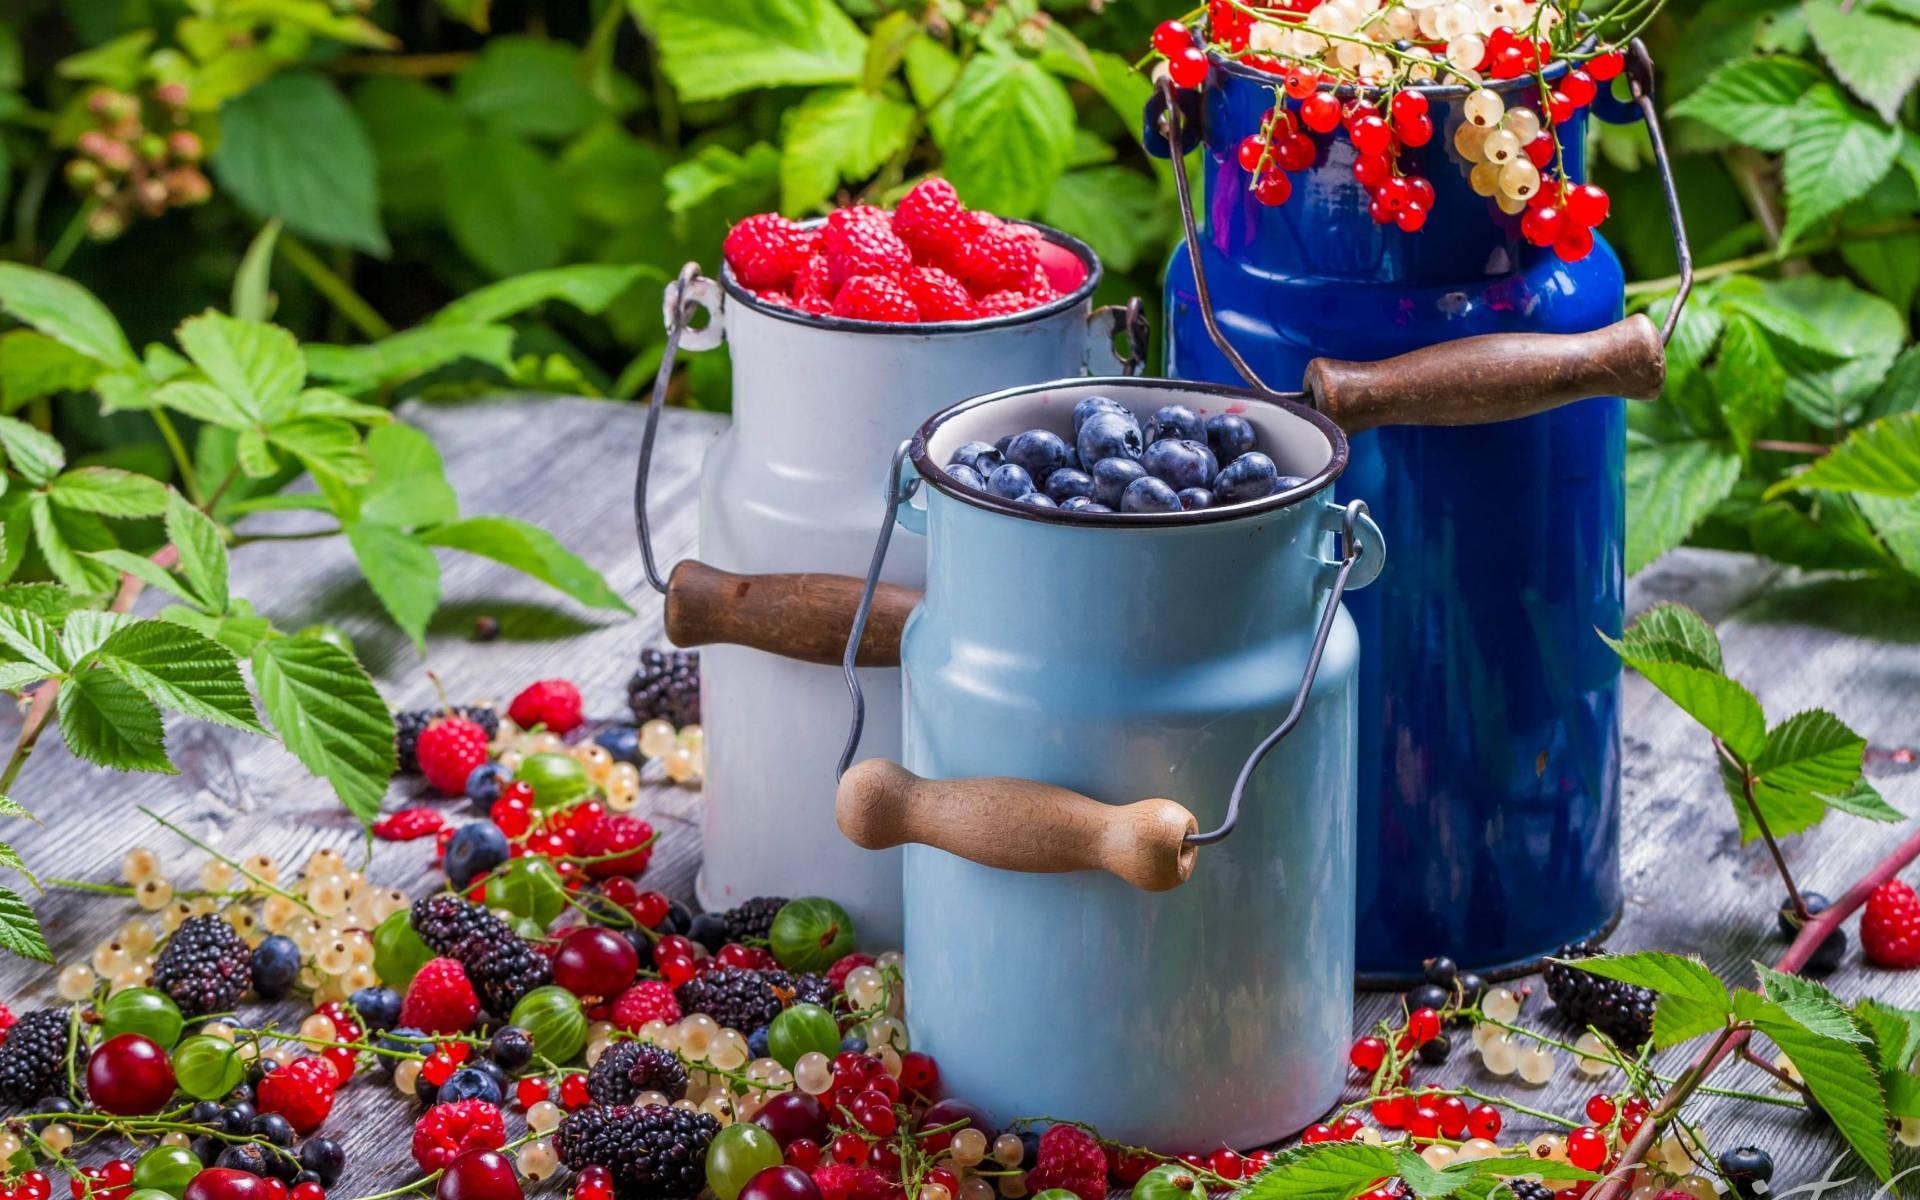 Cans Filled With Berries